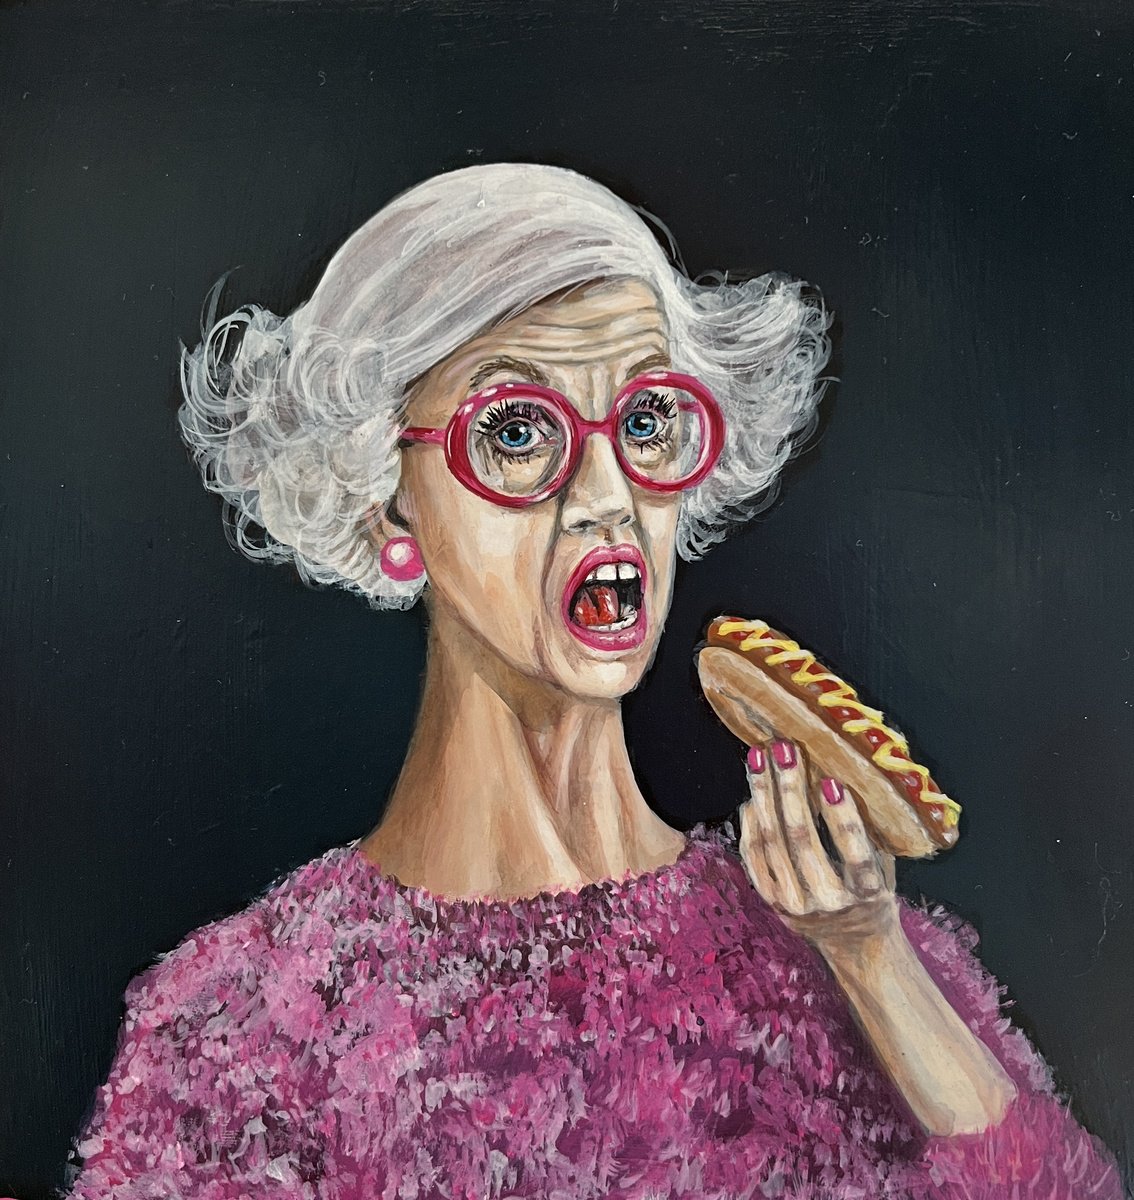 A classy Lady eating a hotdog called ’Caught In The Act’ by Victoria Coleman